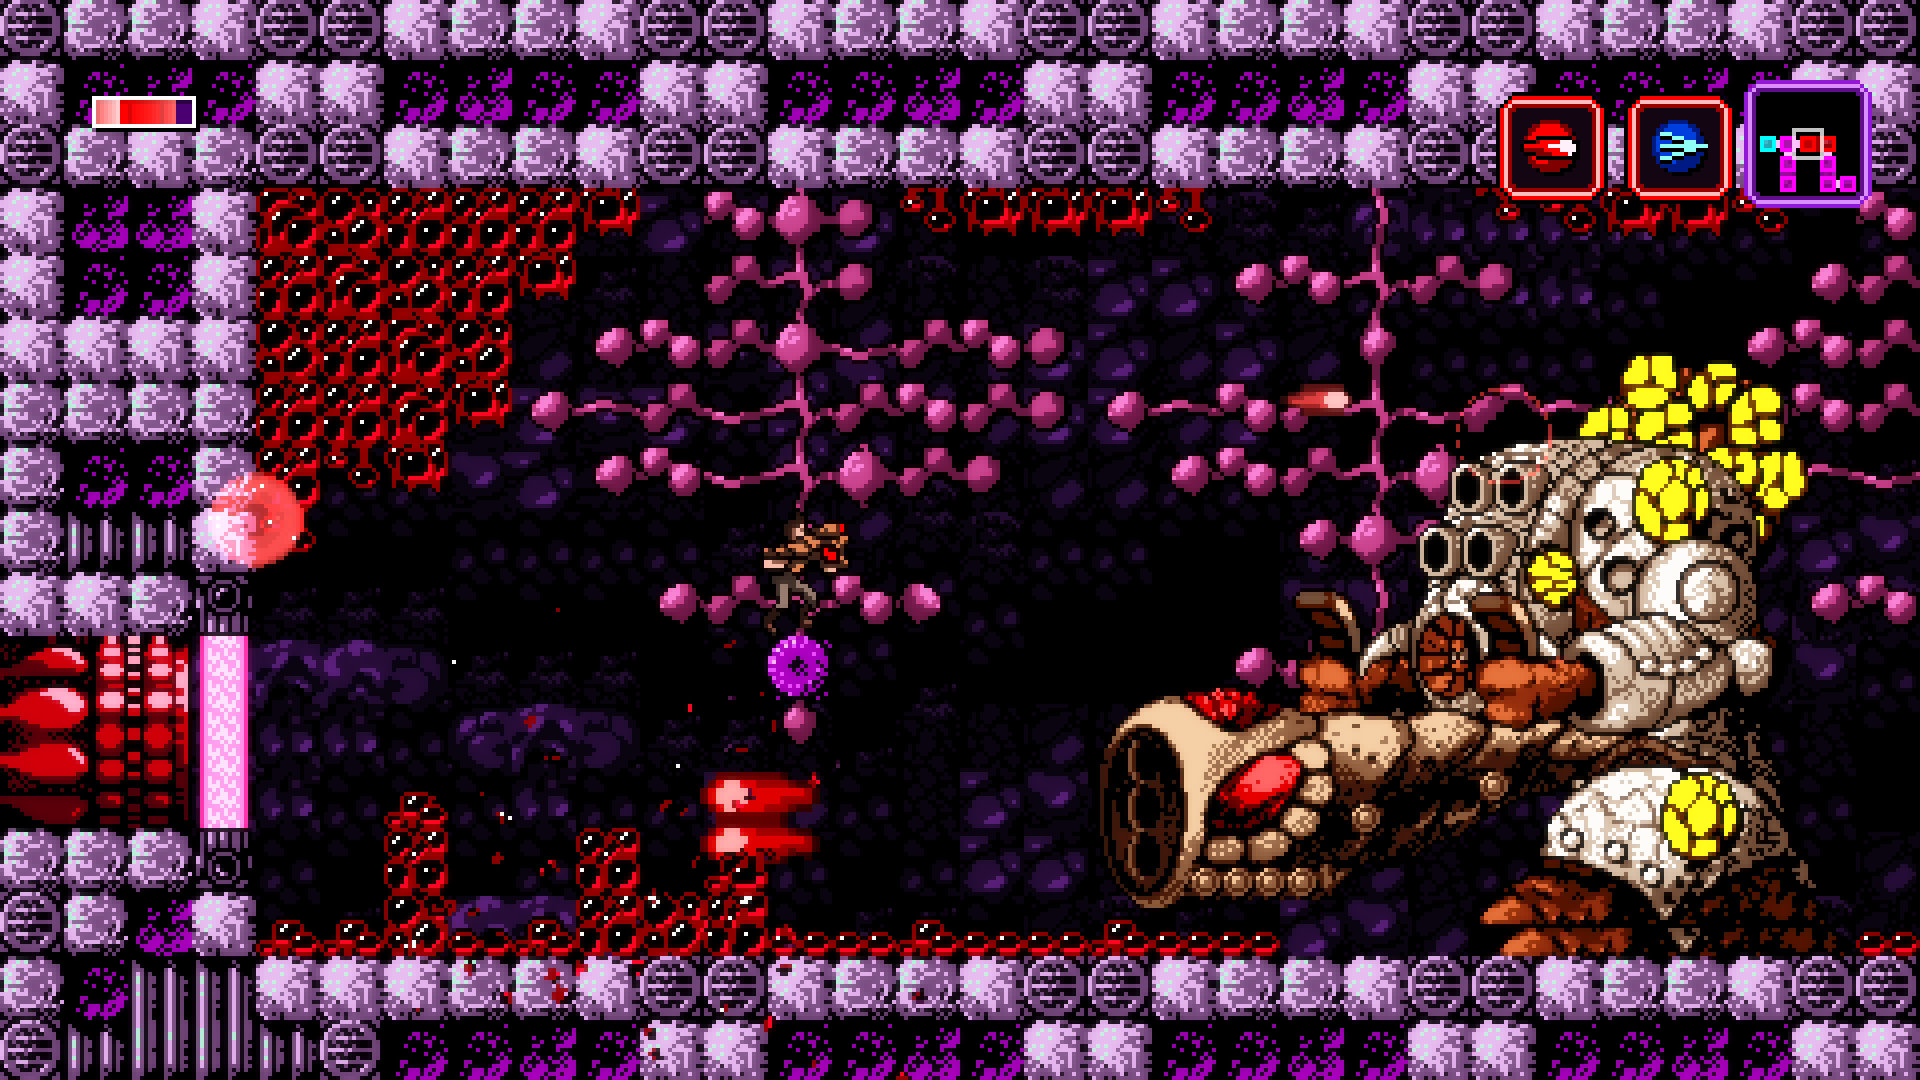 Axiom Verge Backgrounds, Compatible - PC, Mobile, Gadgets| 1920x1080 px